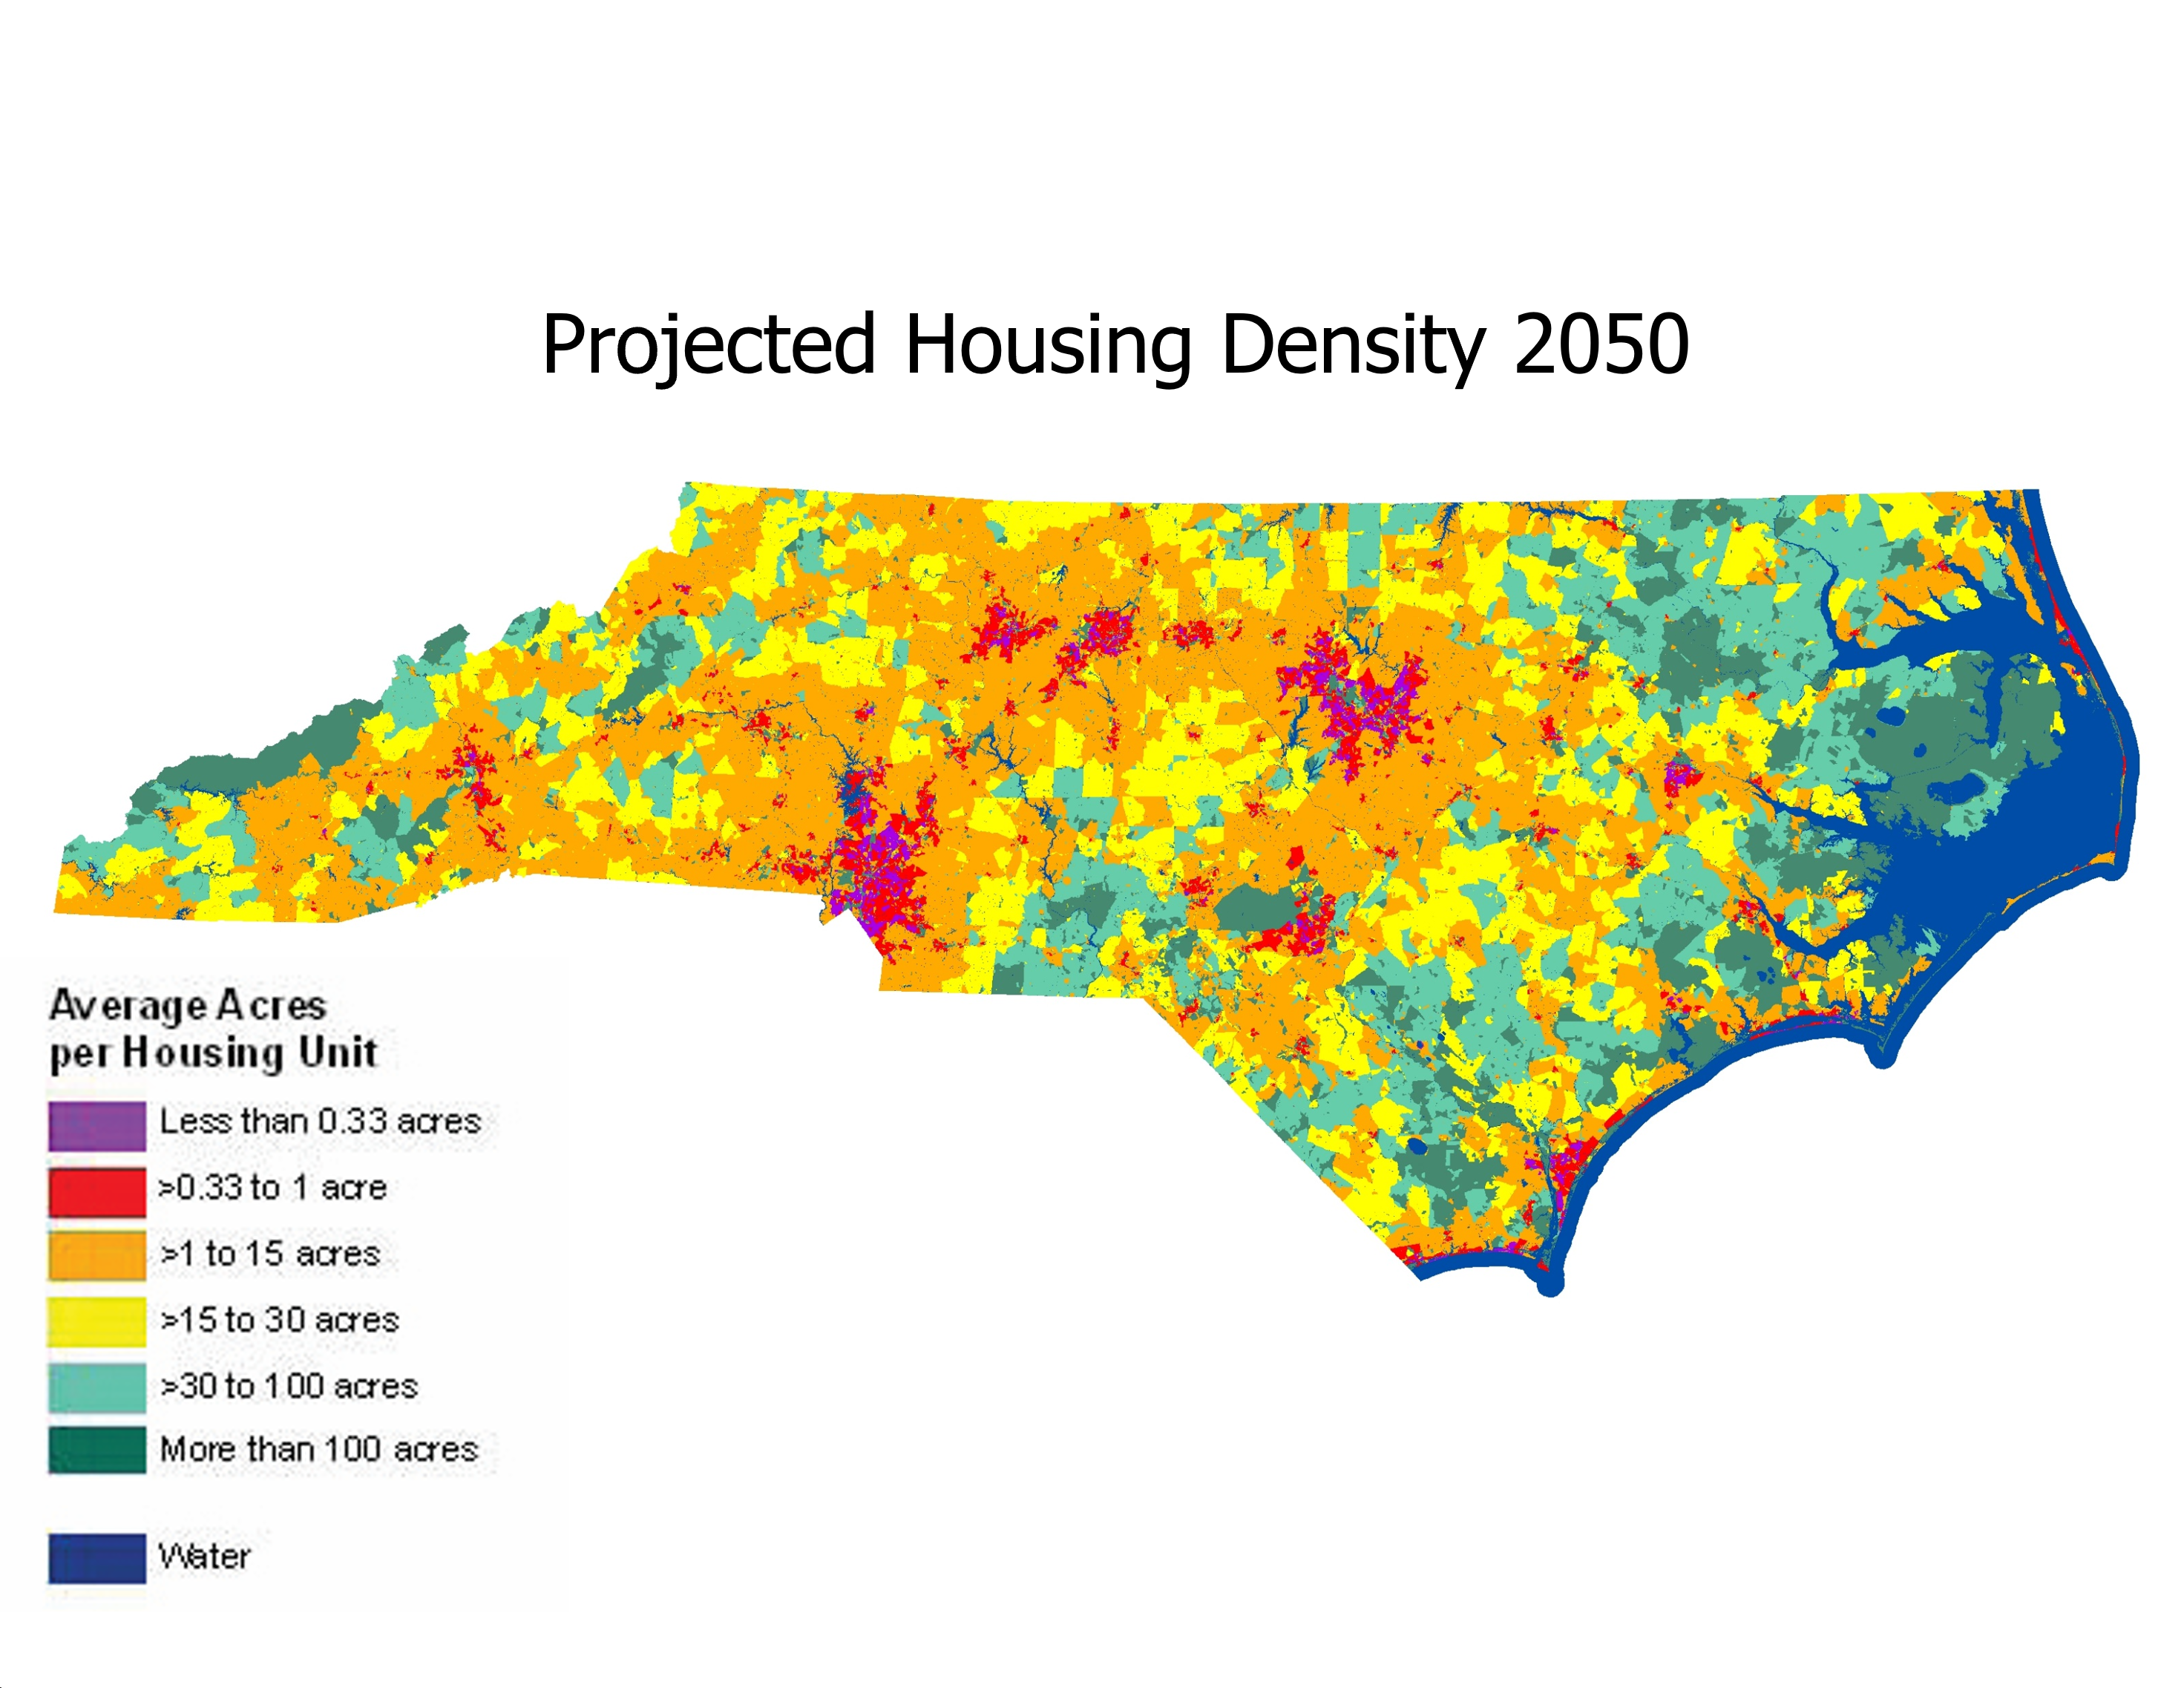 Projected housing density in North Carolina in 2050 shows we expect suburban areas to spread into most rural areas by 2050, if current spread-out patterns of development continue.